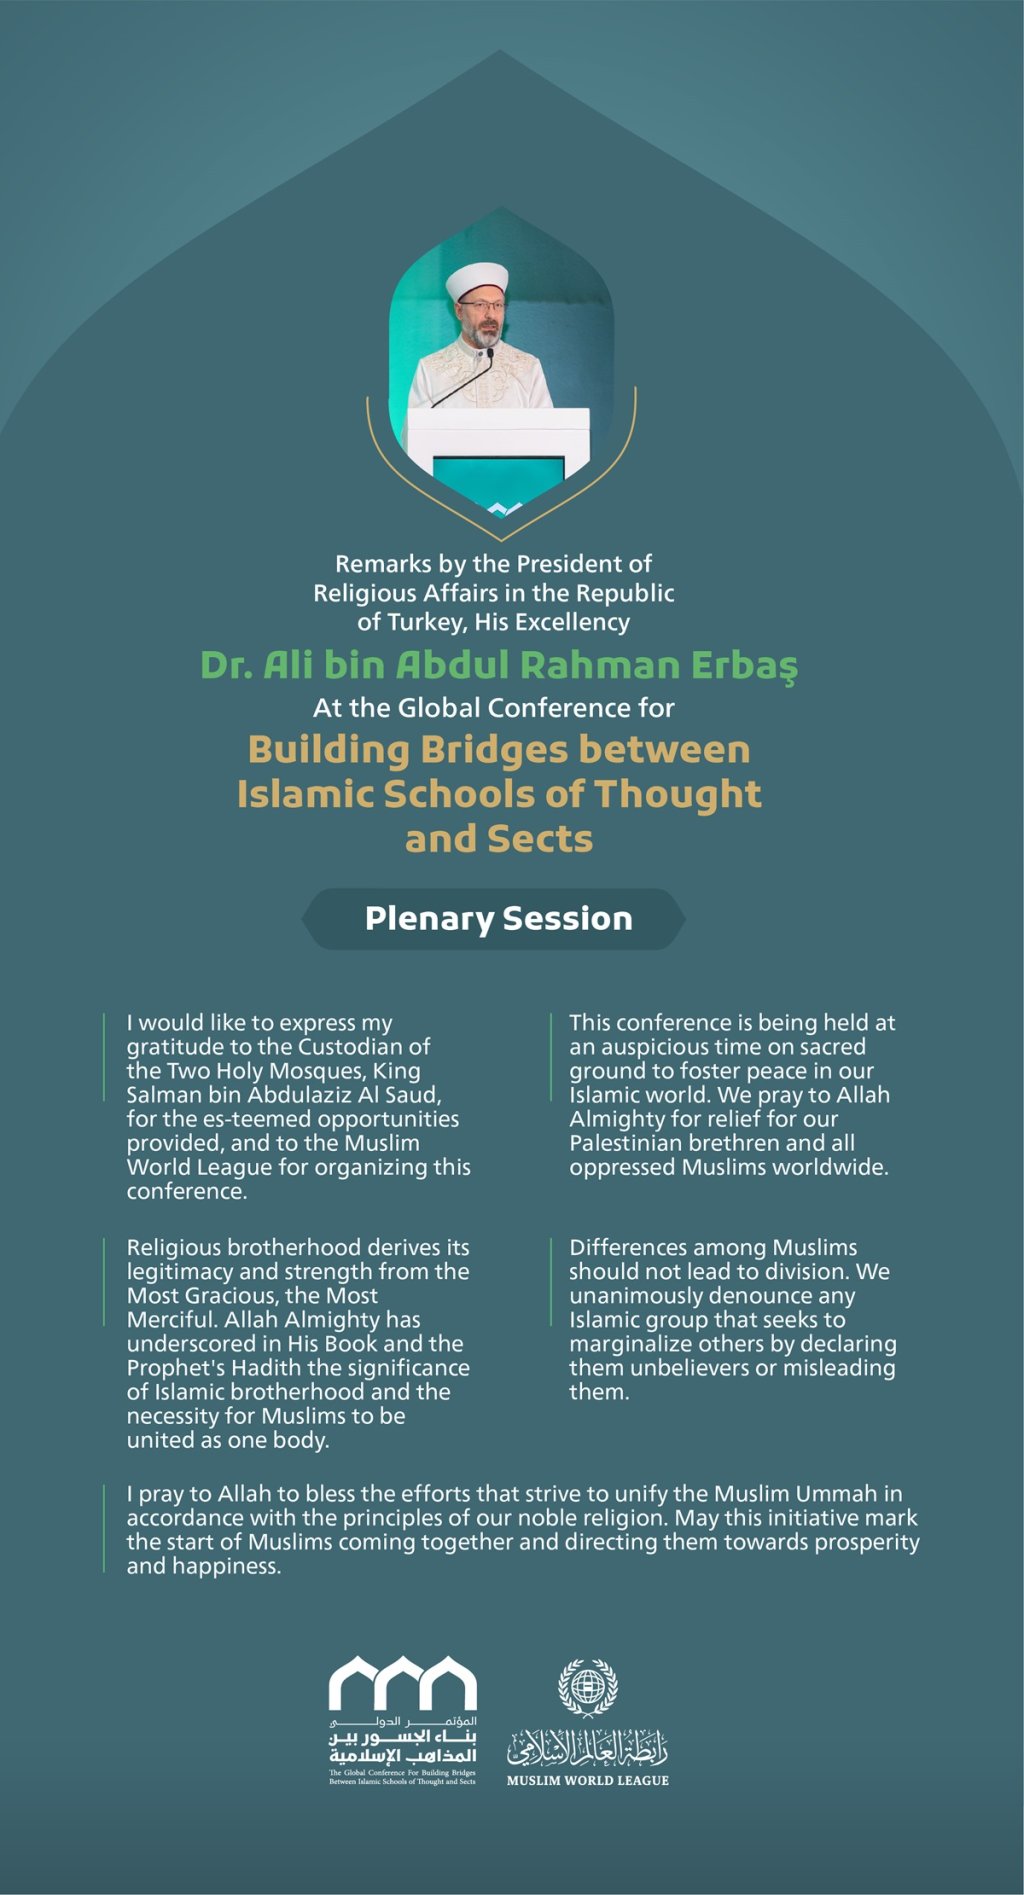 Remarks by His Excellency Dr. Ali bin Abdul Rahman Erbaş, President of Religious Affairs in the Republic of Turkey at the Global Conference for Building Bridges between Islamic Schools of Thought and Sects.